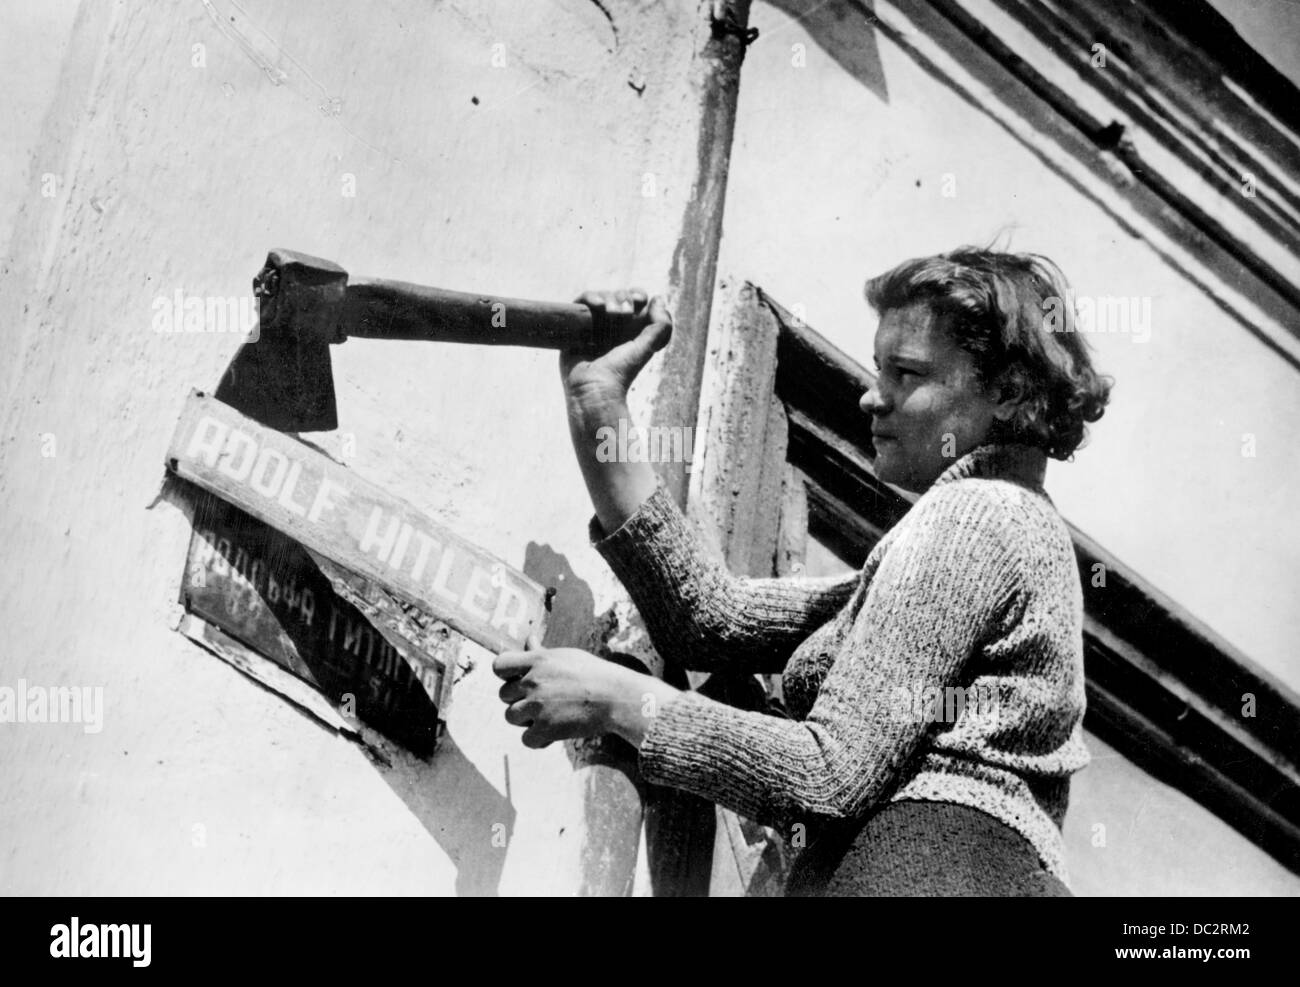 A woman removes the street sign of a street renamed 'Adolf Hitler', revealing the original street sign with Russian letters, at the end of World War II. Date and place unknown. Fotoarchiv für Zeitgeschichte Stock Photo